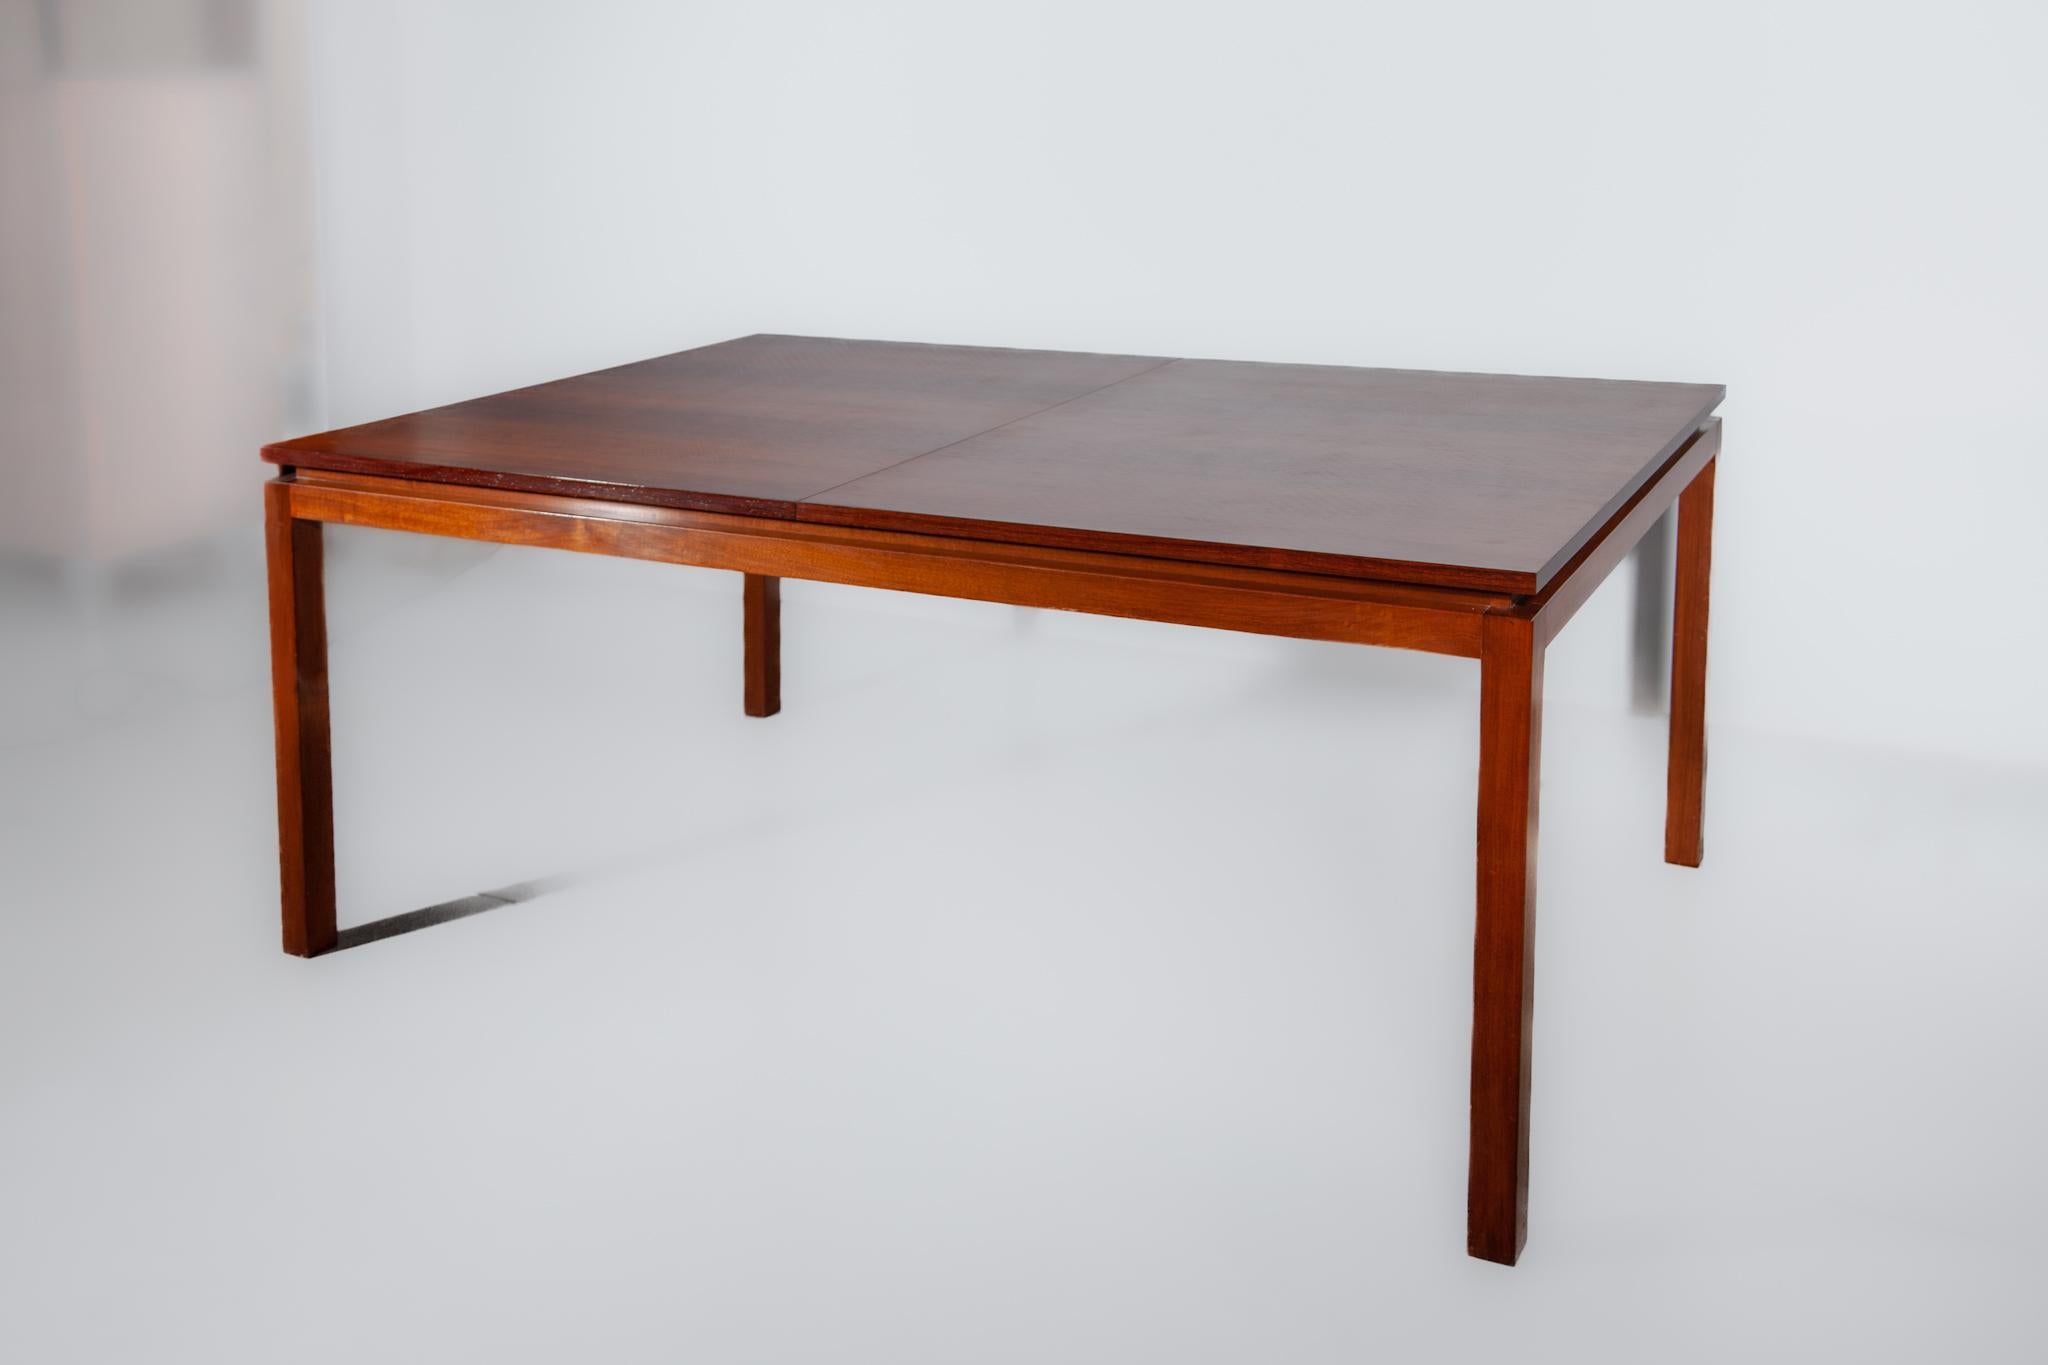 Mid-20th Century Diningroom Set Table and Six Chairs by Alfred Hendrickx 1960s for Belform